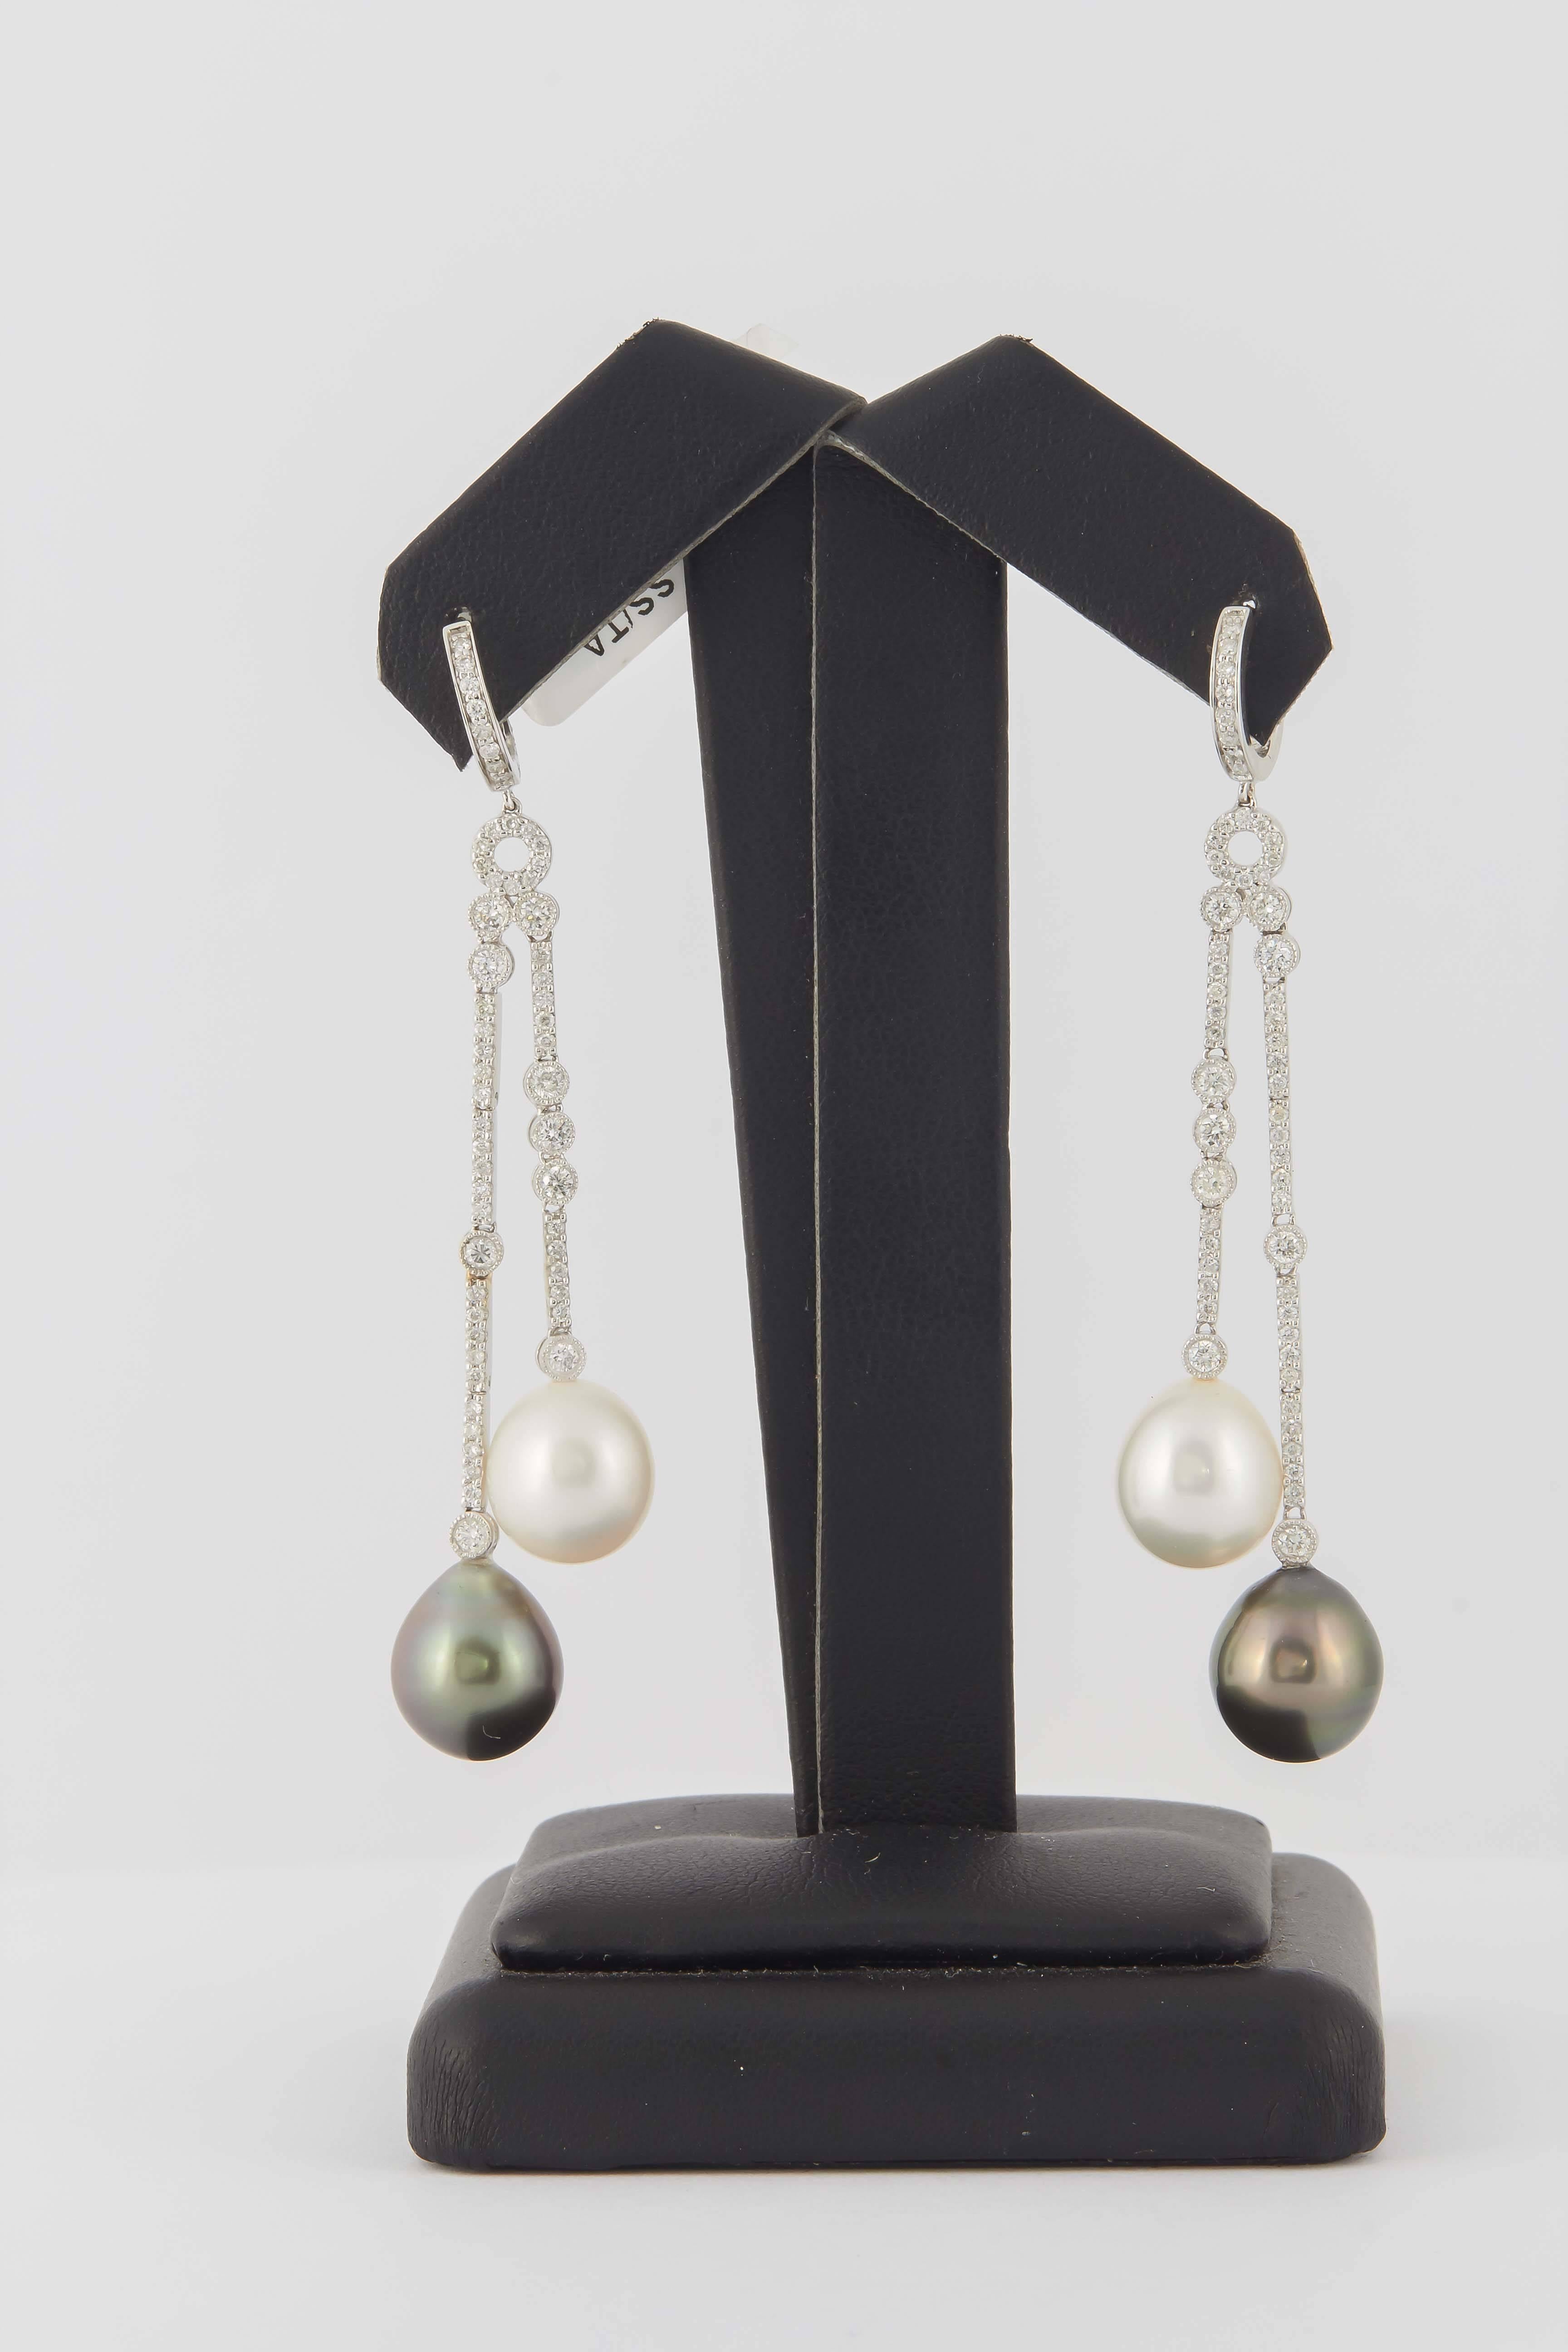 18KWhite gold dangle earrings featuring two South Sea Pearls and two Tahitian Pearls measuring 10-11 mm with 114 diamonds weighing 1.07 carats.  
